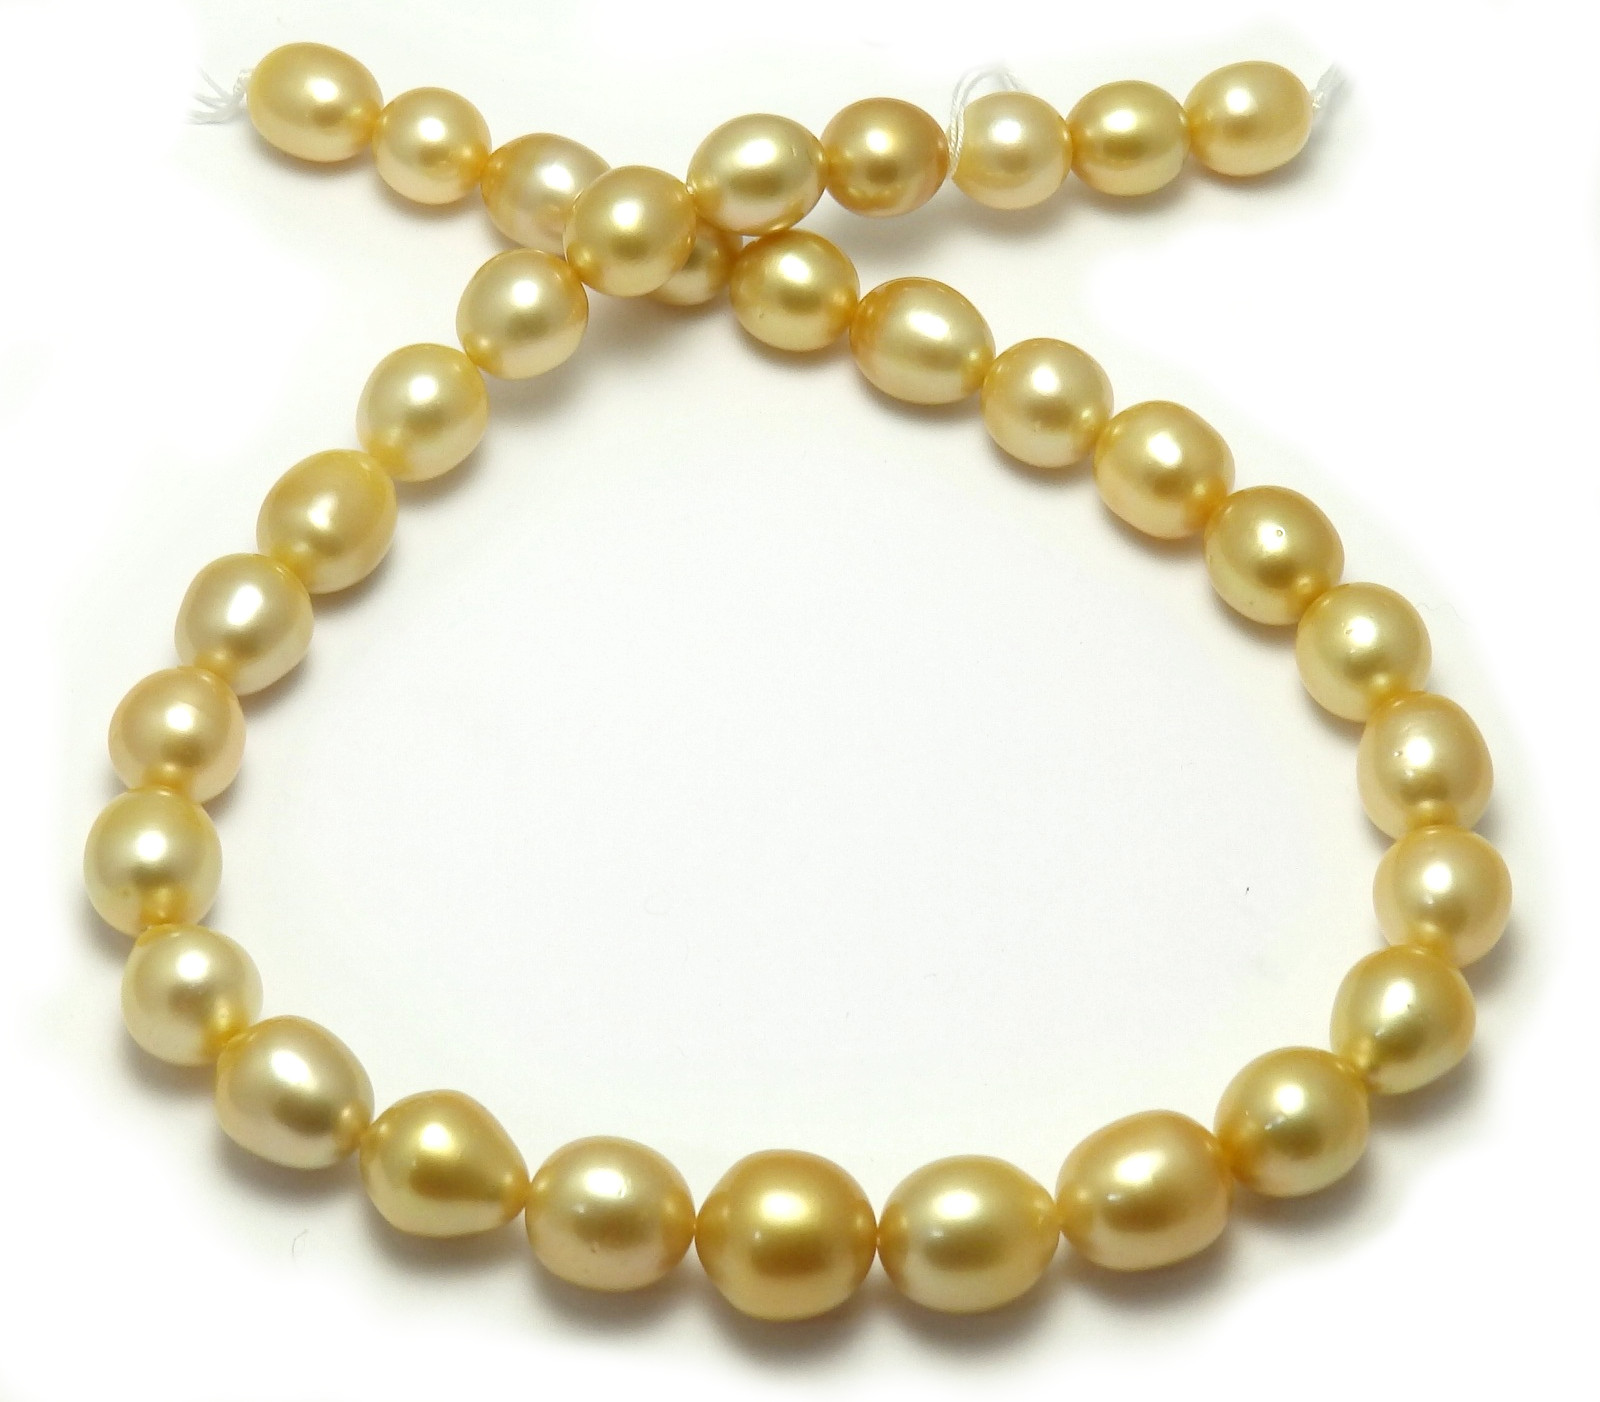 Discounted Golden South Sea Pearl Necklace with Oval/Drop Pearls